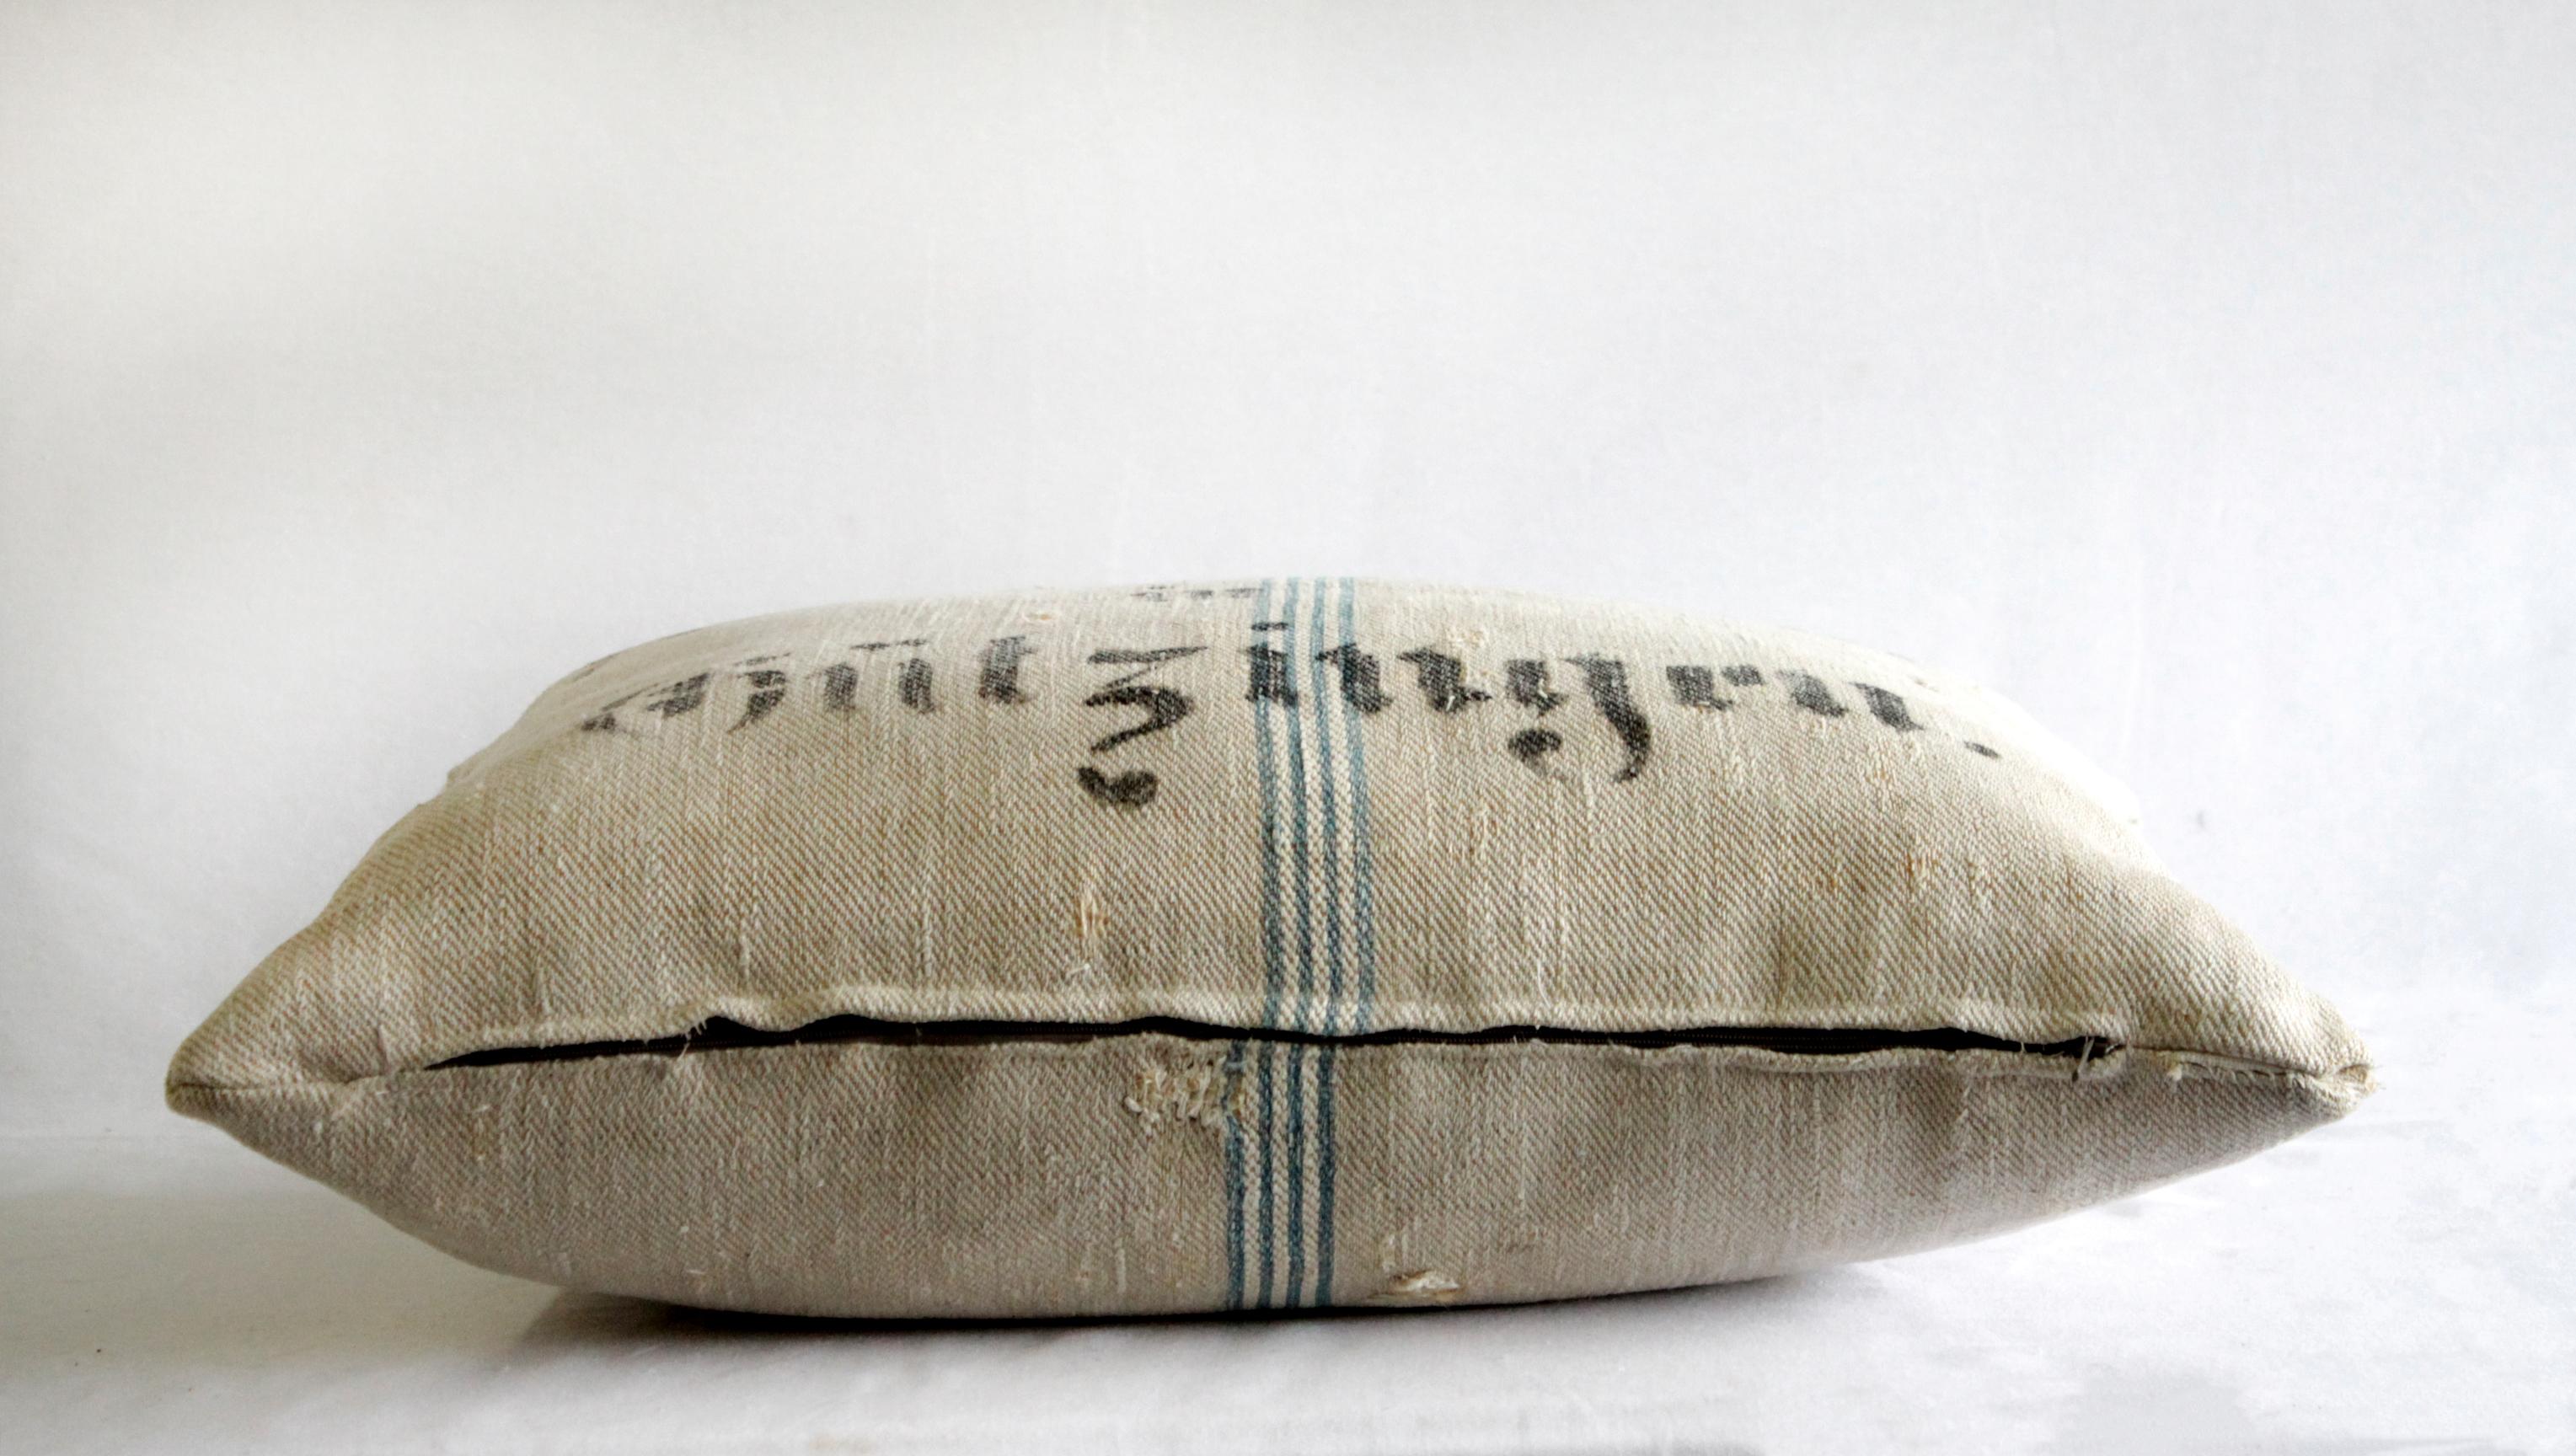 Early 20th century antique European Grainsack pillow with lettering
Natural flax linen background with white and blue stripes, and original stenciled monograming front.
Hidden zipper closure.
Down insert is included.
Measures:
16